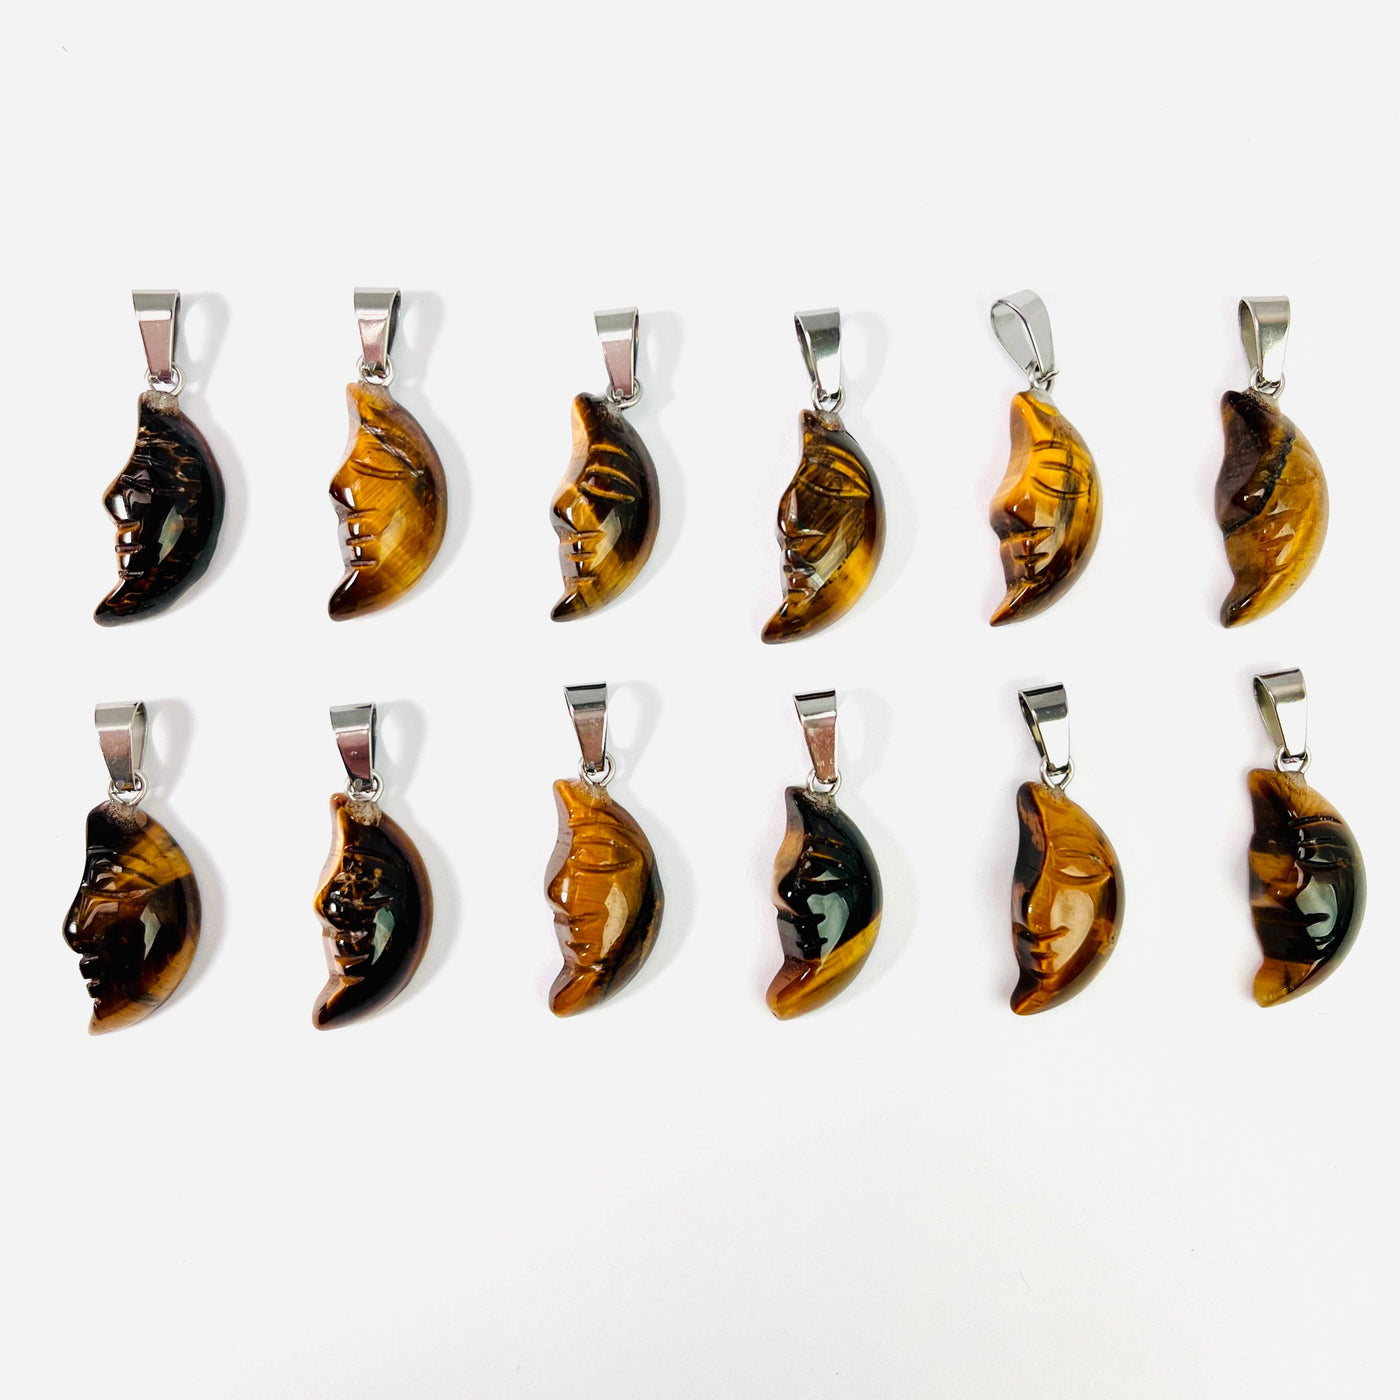 Twelve Tigers Eye Crescent Moon Gemstones Pendants lined up in two rows on a white surface.